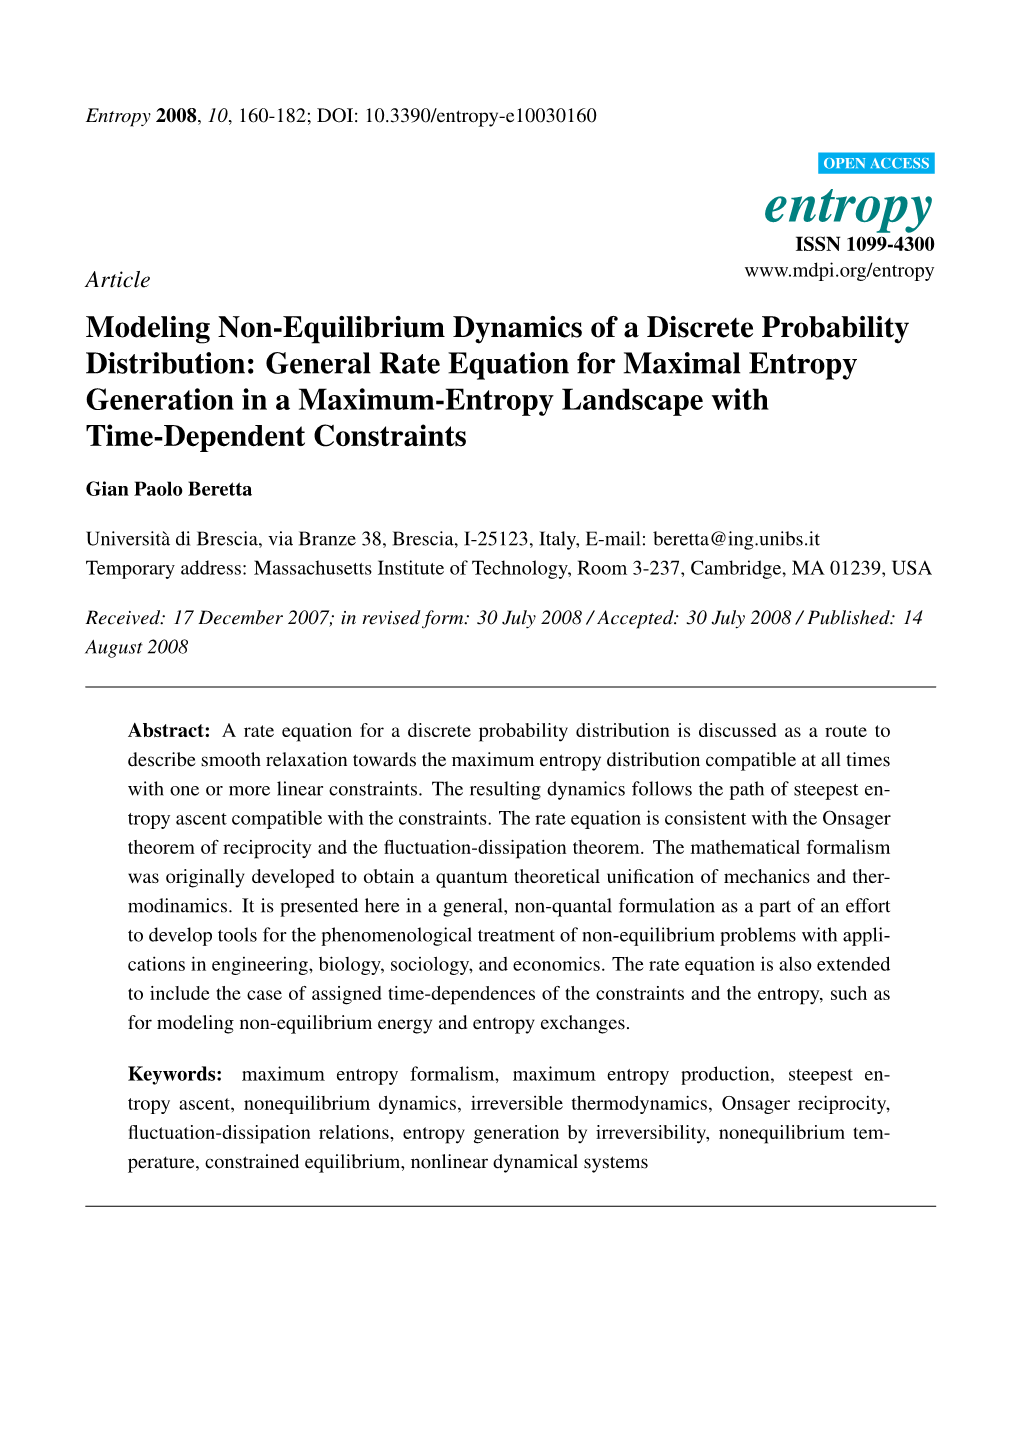 General Rate Equation for Maximal Entropy Generation in a Maximum-Entropy Landscape with Time-Dependent Constraints